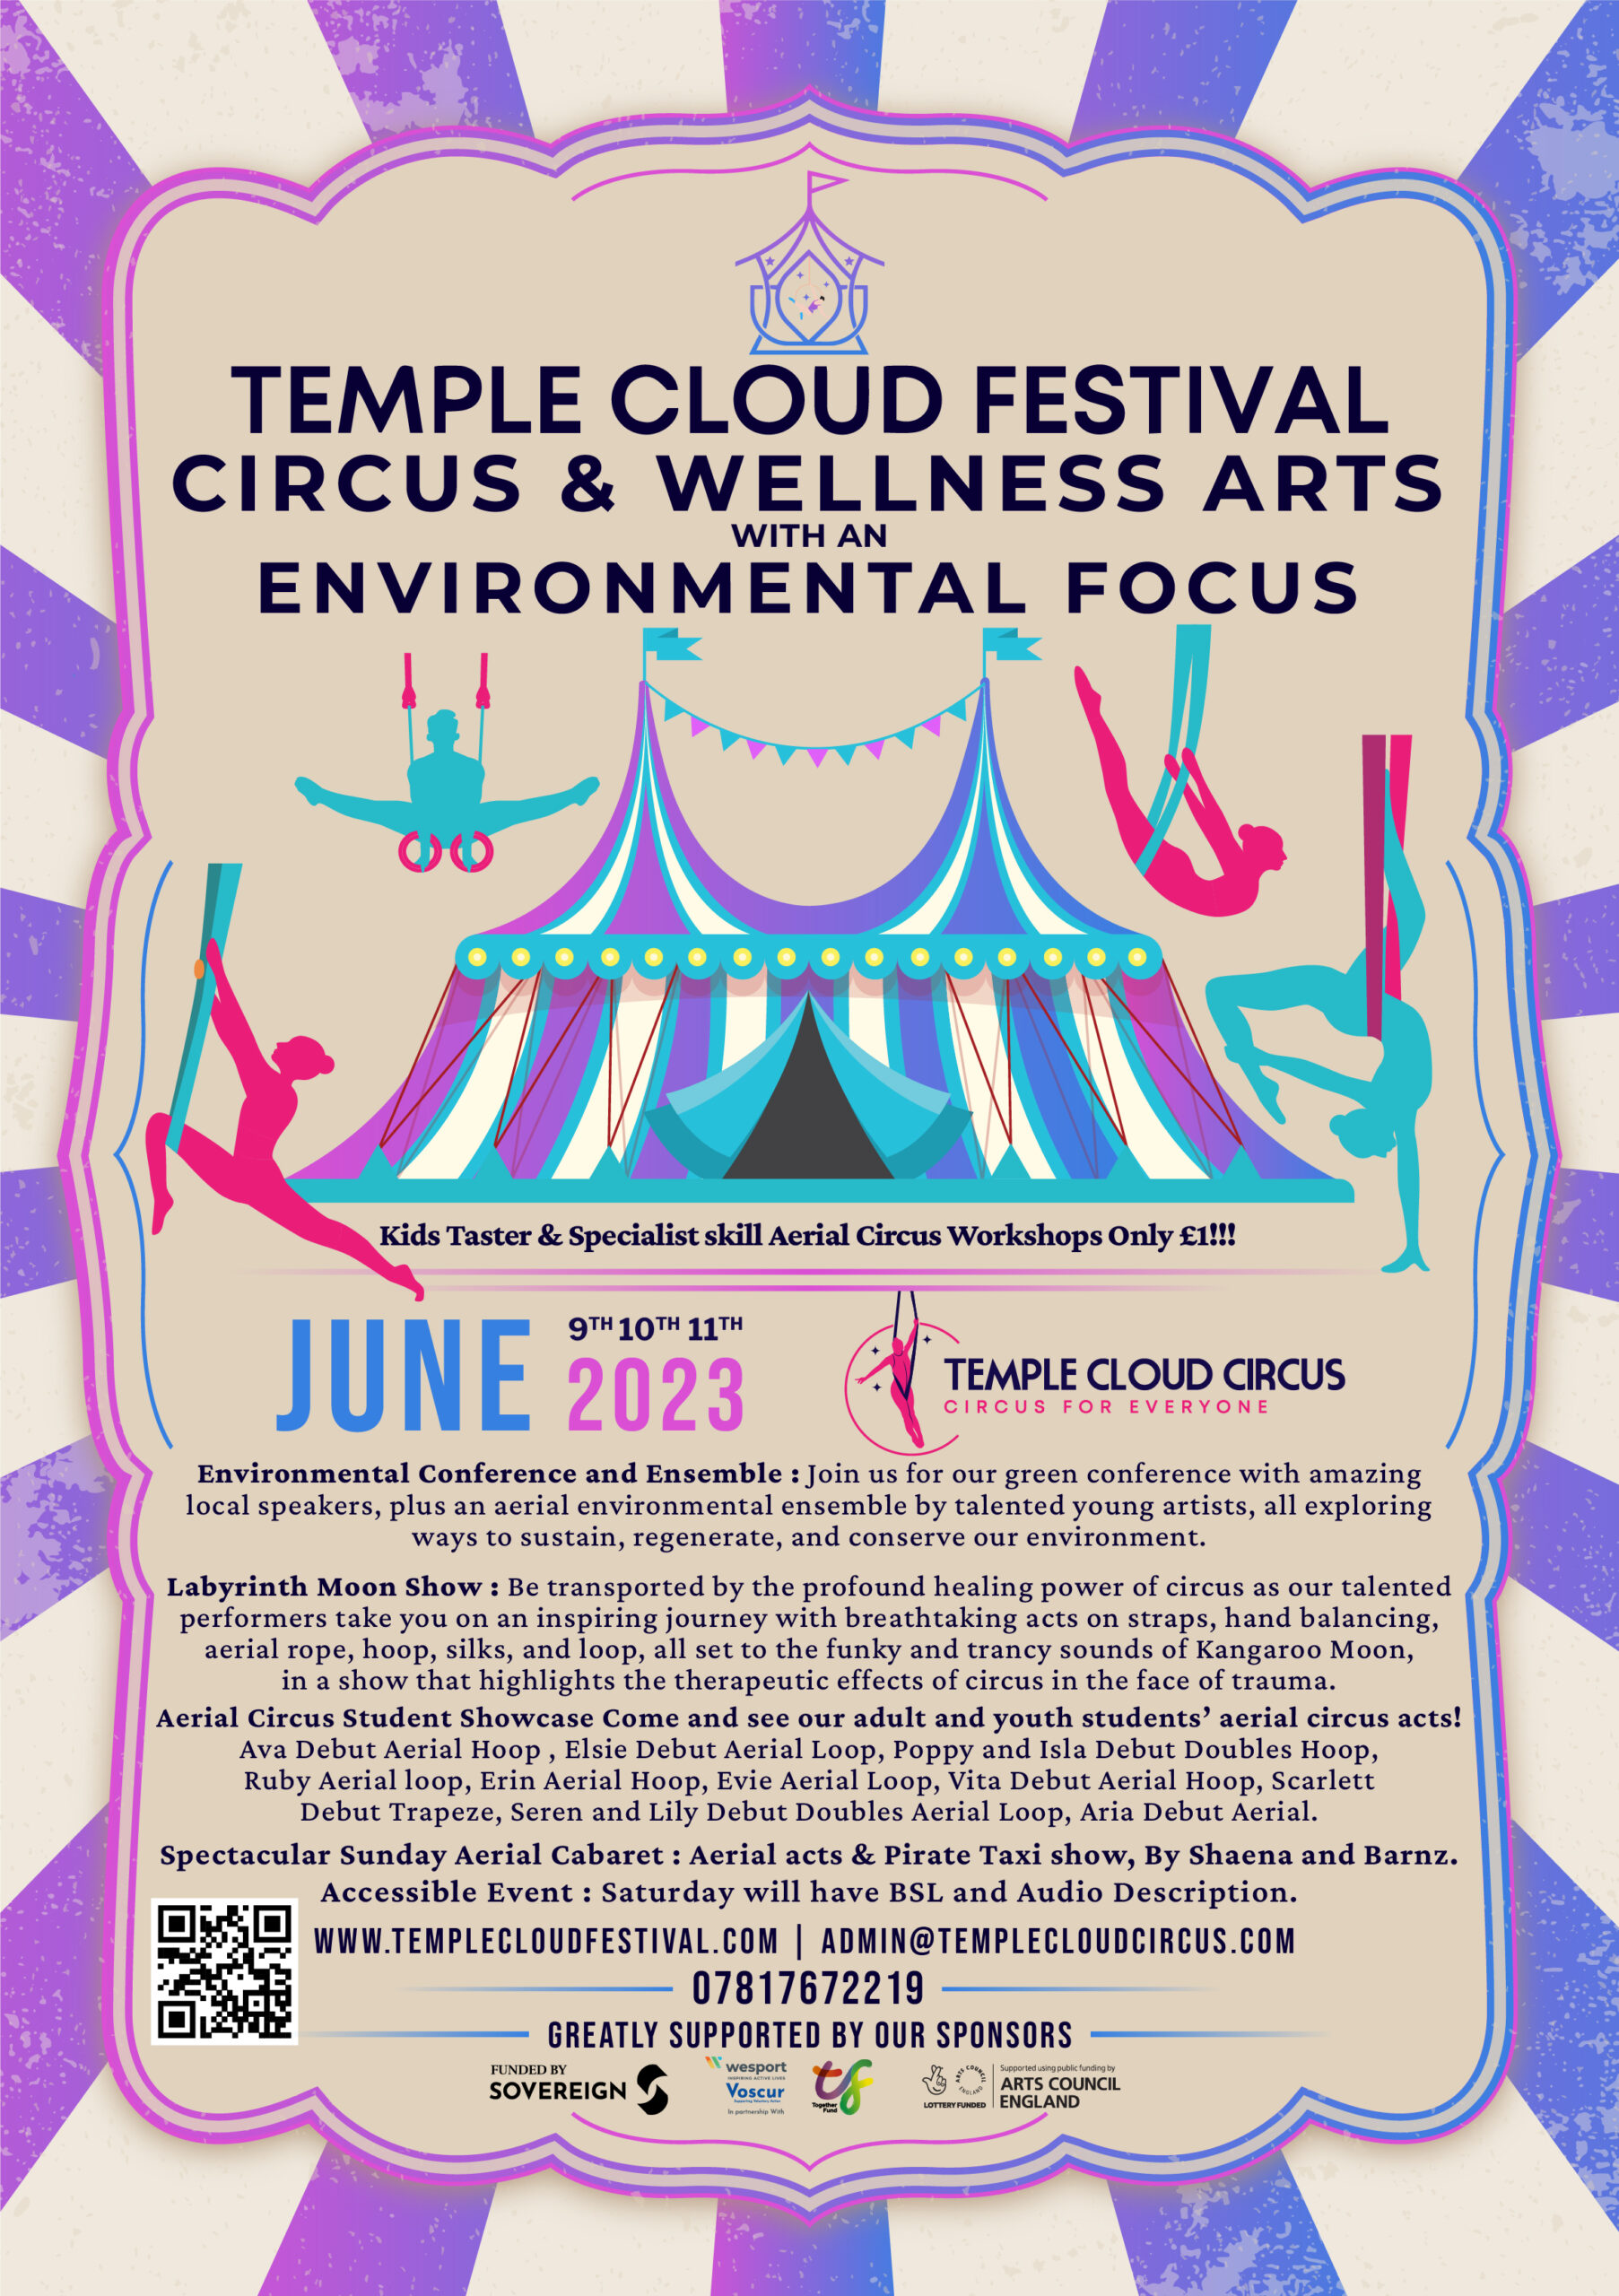 Temple Cloud Circus Festival. Friday 9th Saturday 10th and Sunday 11th June  2023